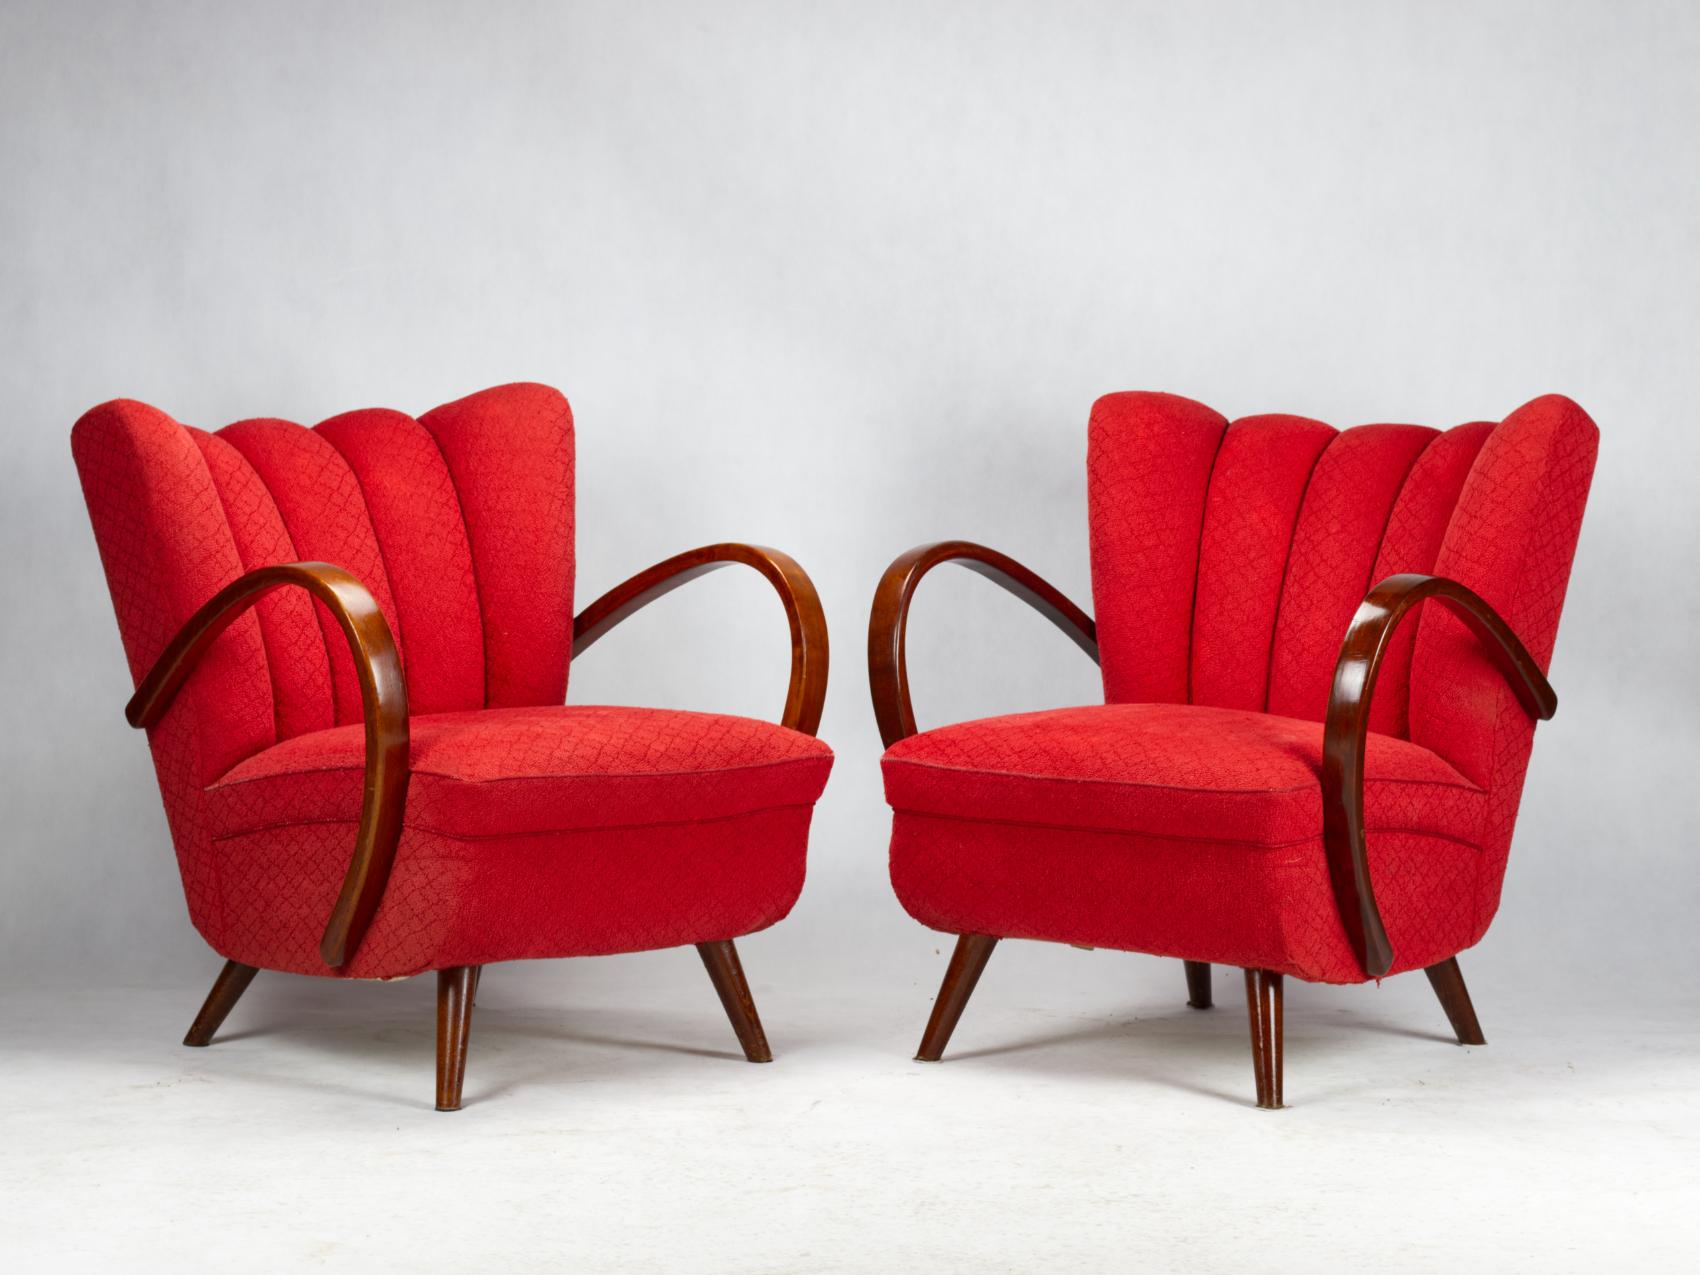 20th Century Pair of Lounge Chairs by Jindrich Halabala, 1950s